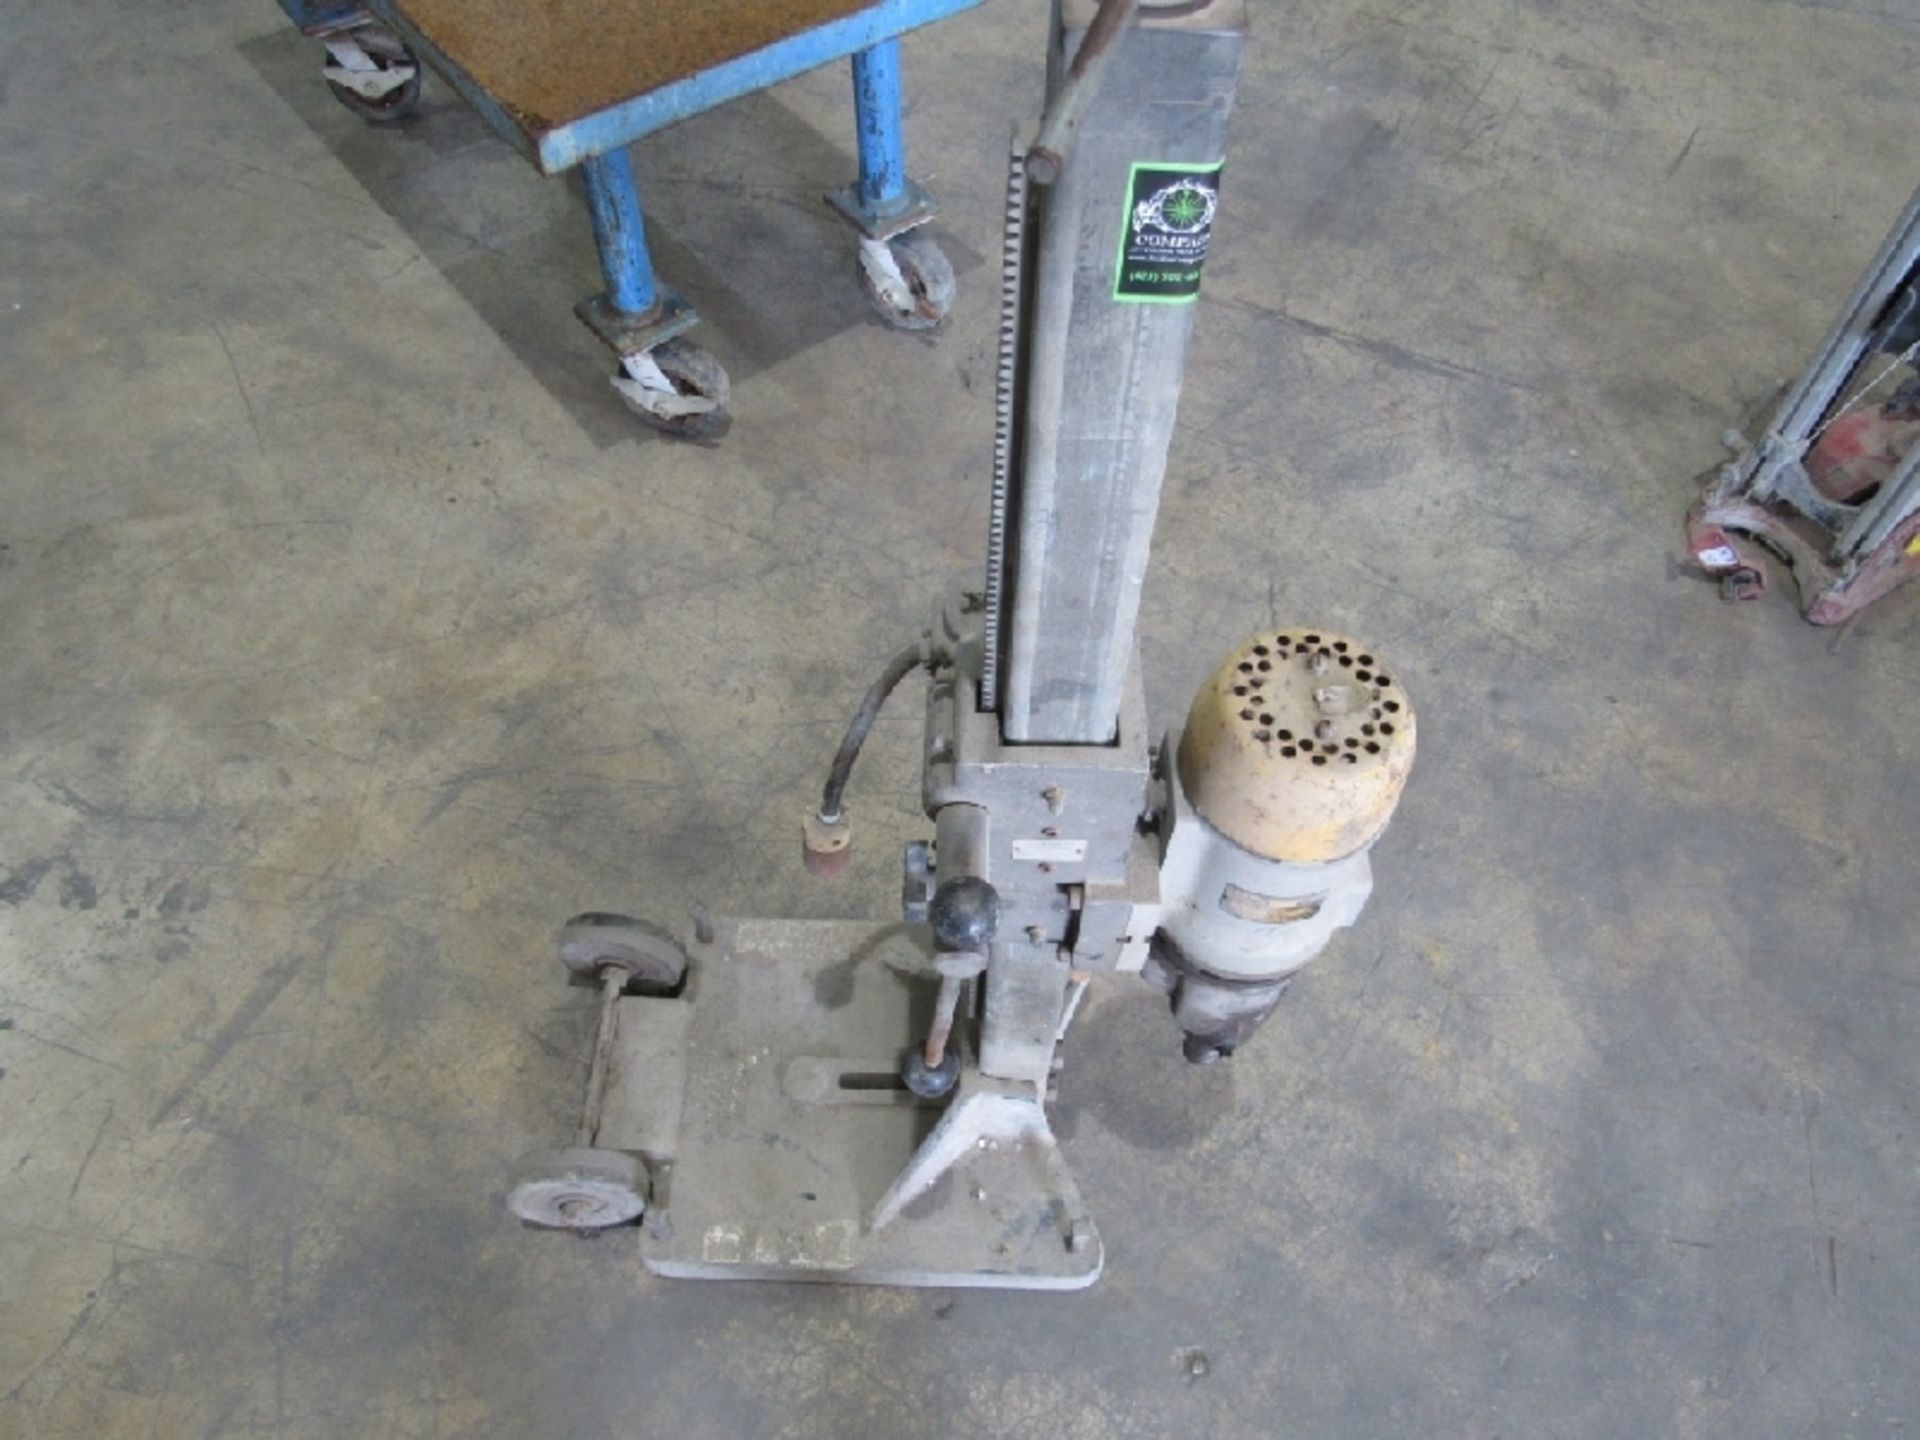 Core Drill with Stand- ***Located in Chattanooga, TN*** MFR - DeWalt Model - DW194 120 Volts 20 Amps